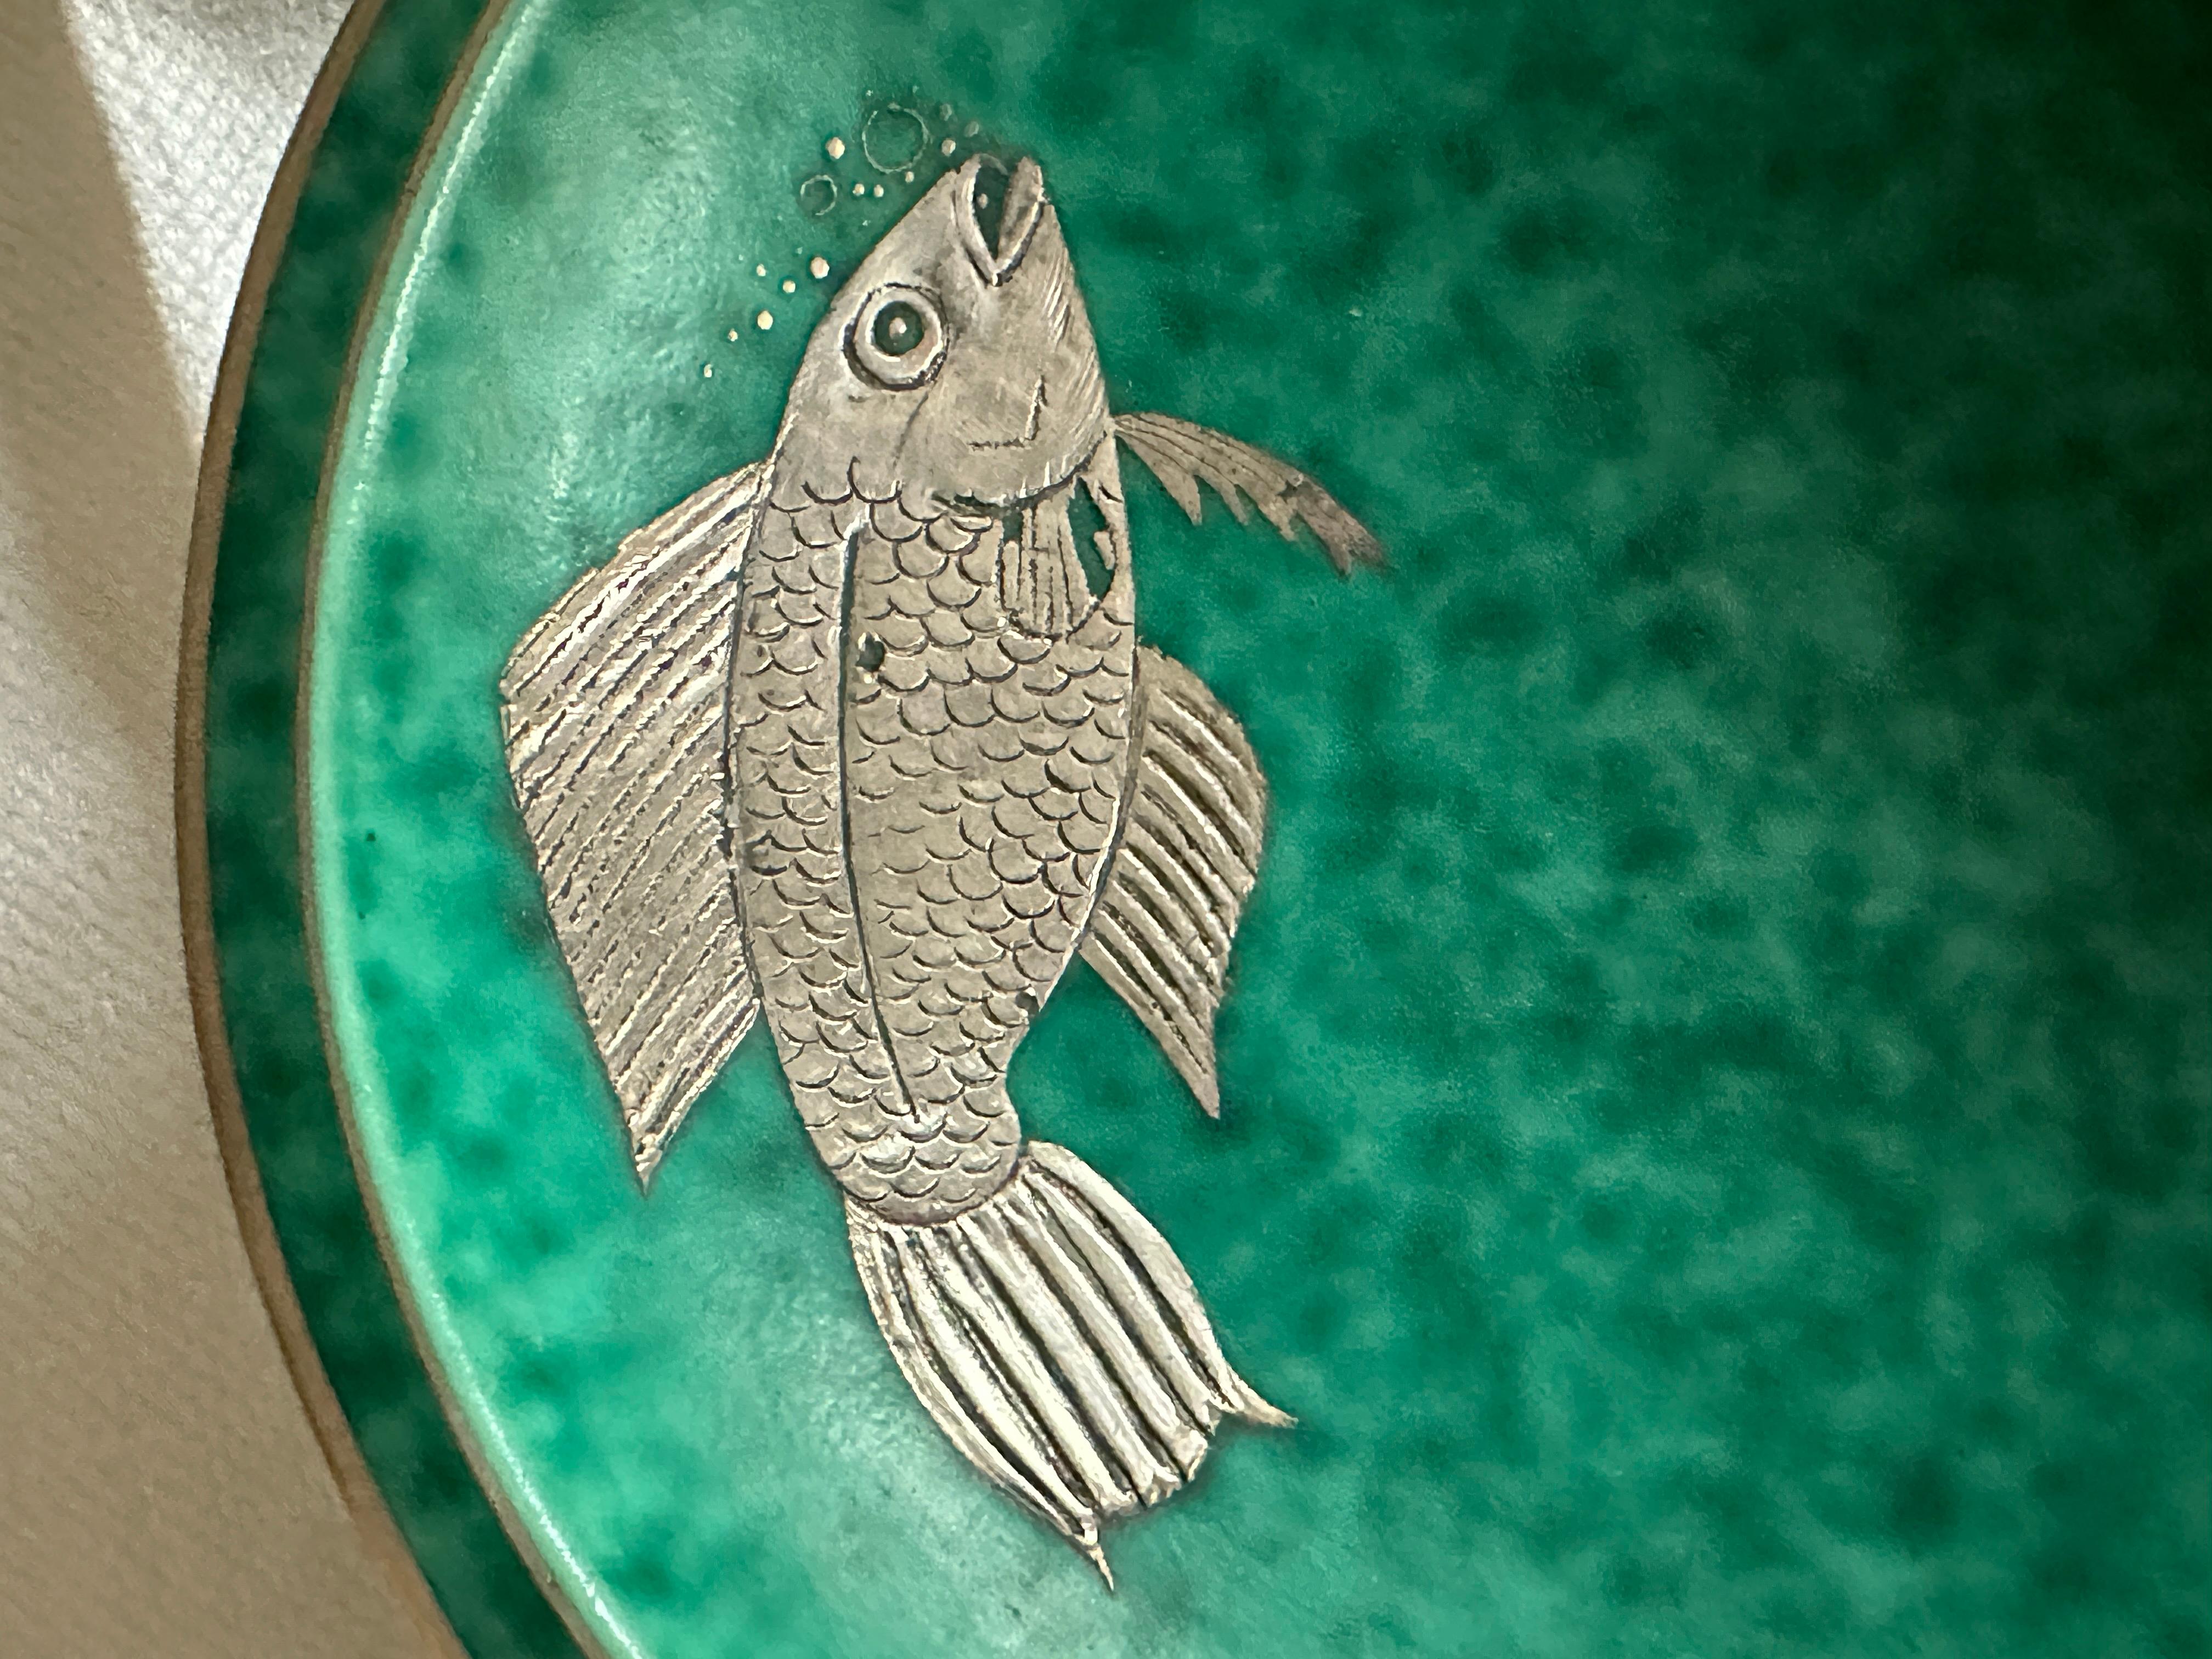 Nice bowl with silver inlay figuring a fish and bubbles... Argenta série by Wilhelm kage, Gustavsberg.
Good condition
Wilhelm Kåge (1889-1960) is one of the most well-known representatives of the illustrious Swedish ceramic design of the 20th